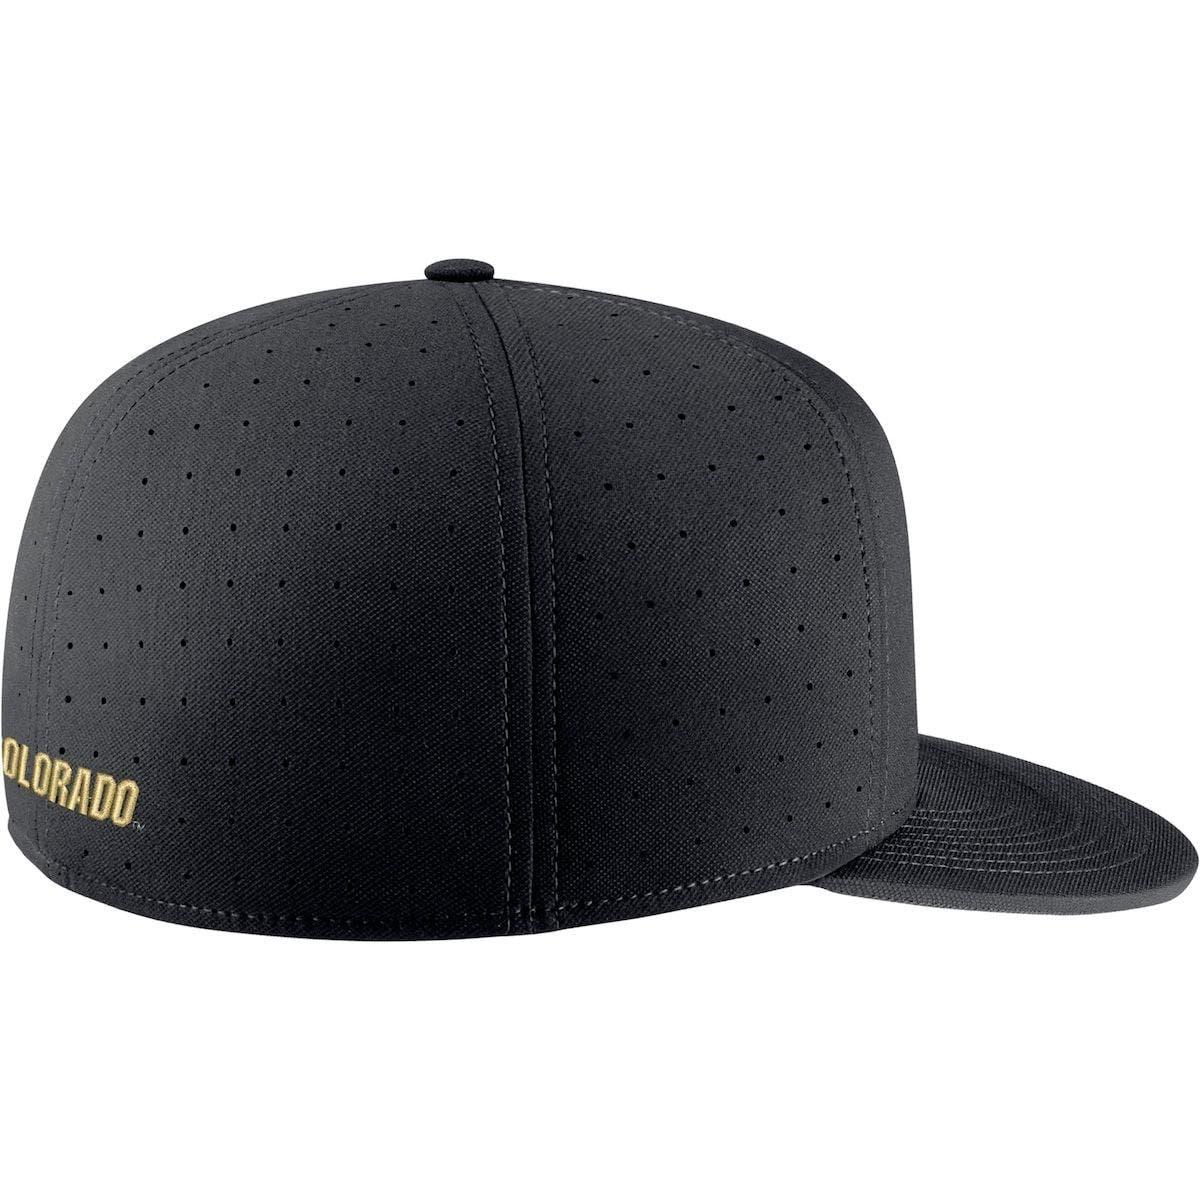 fitted baseball cap